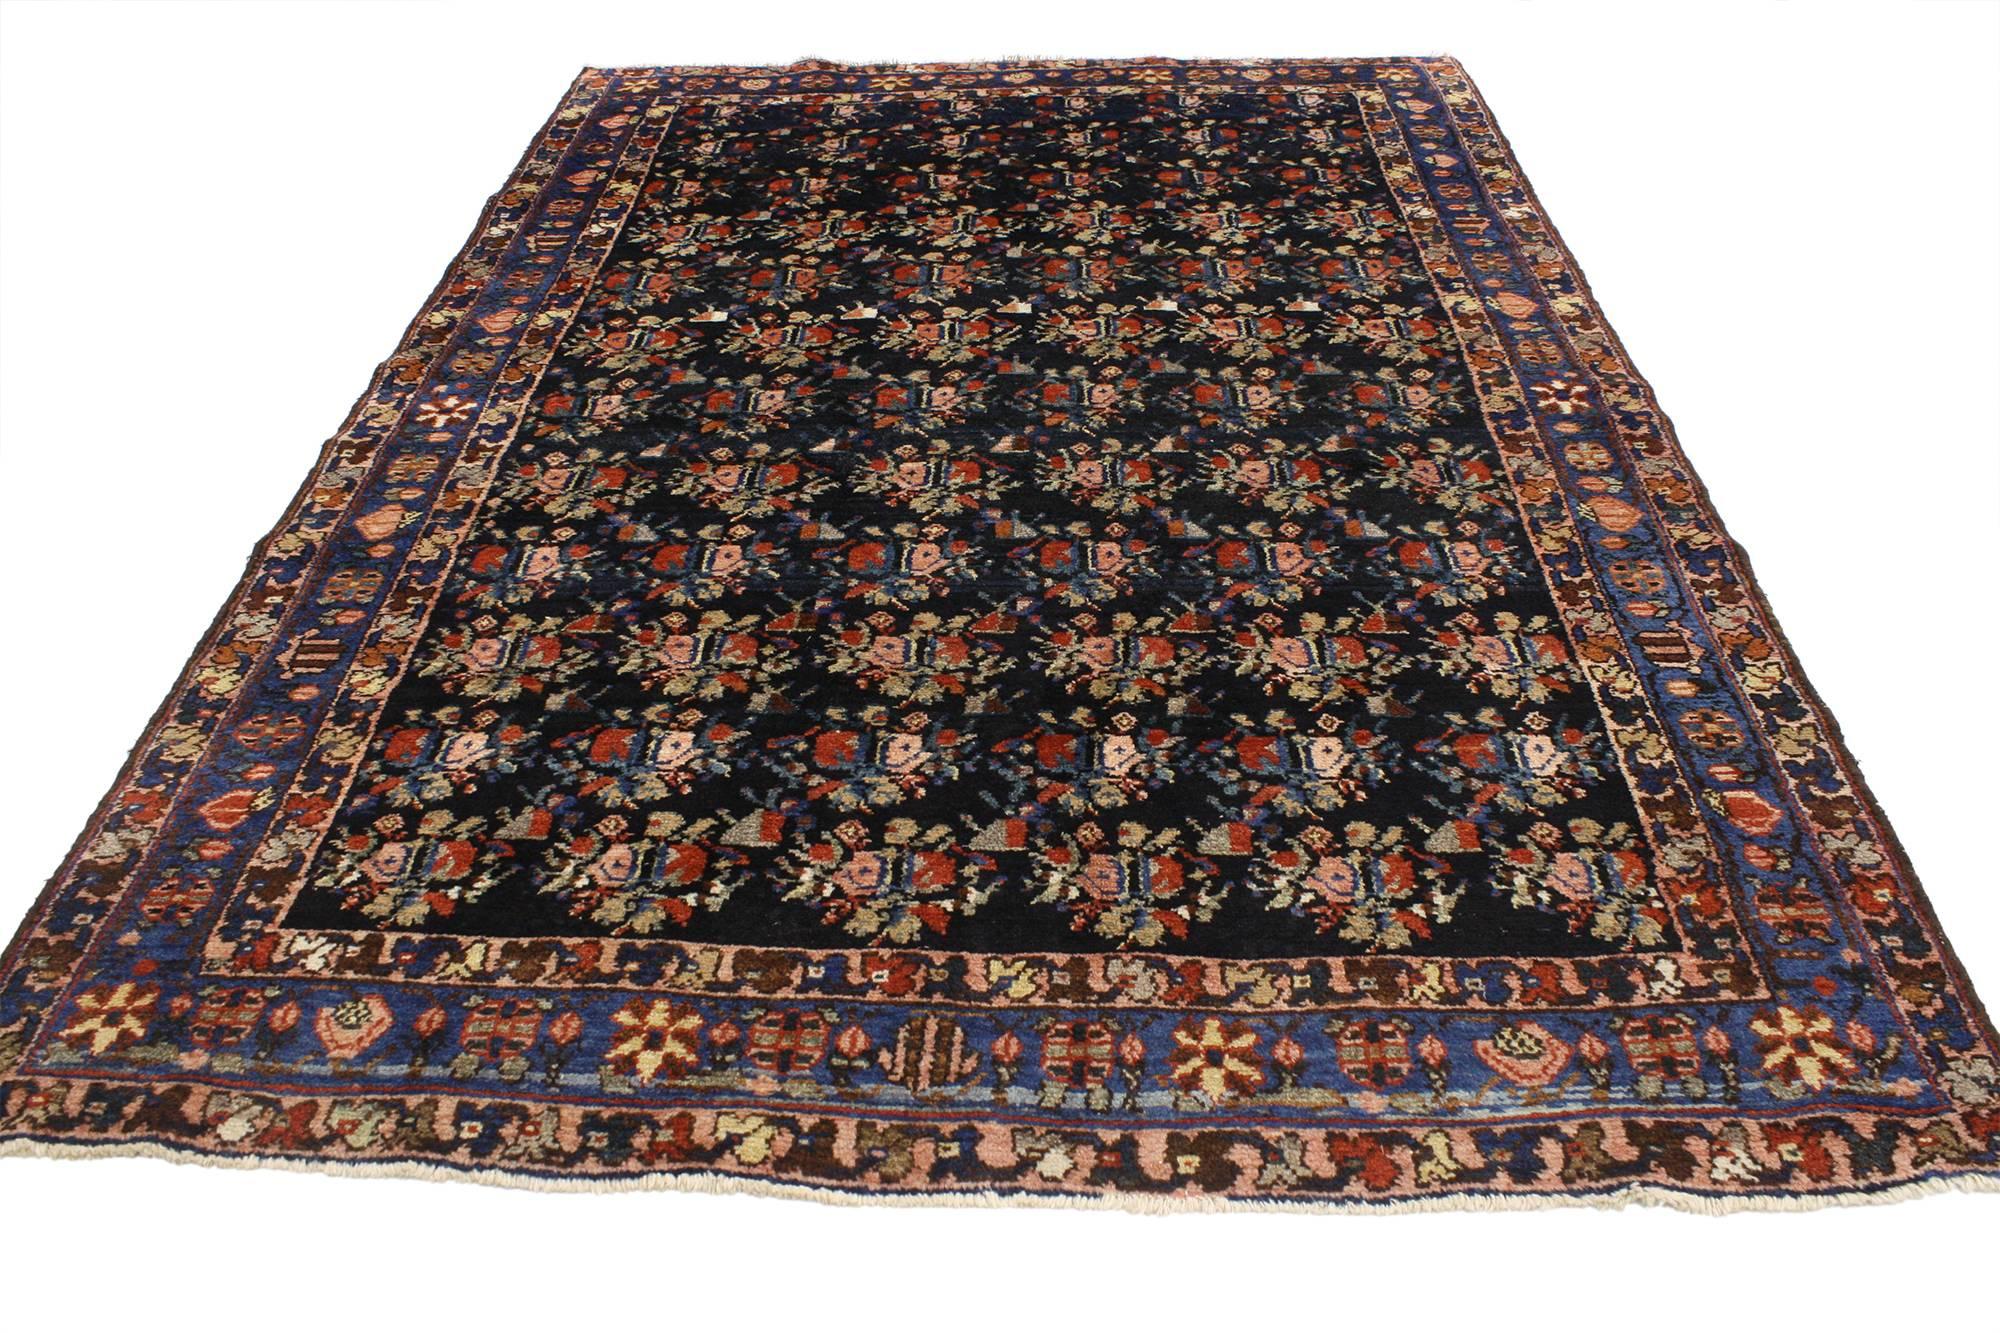 Hand-Knotted Antique Persian Hamadan Rug with Art Deco Style, Entry or Foyer Rug